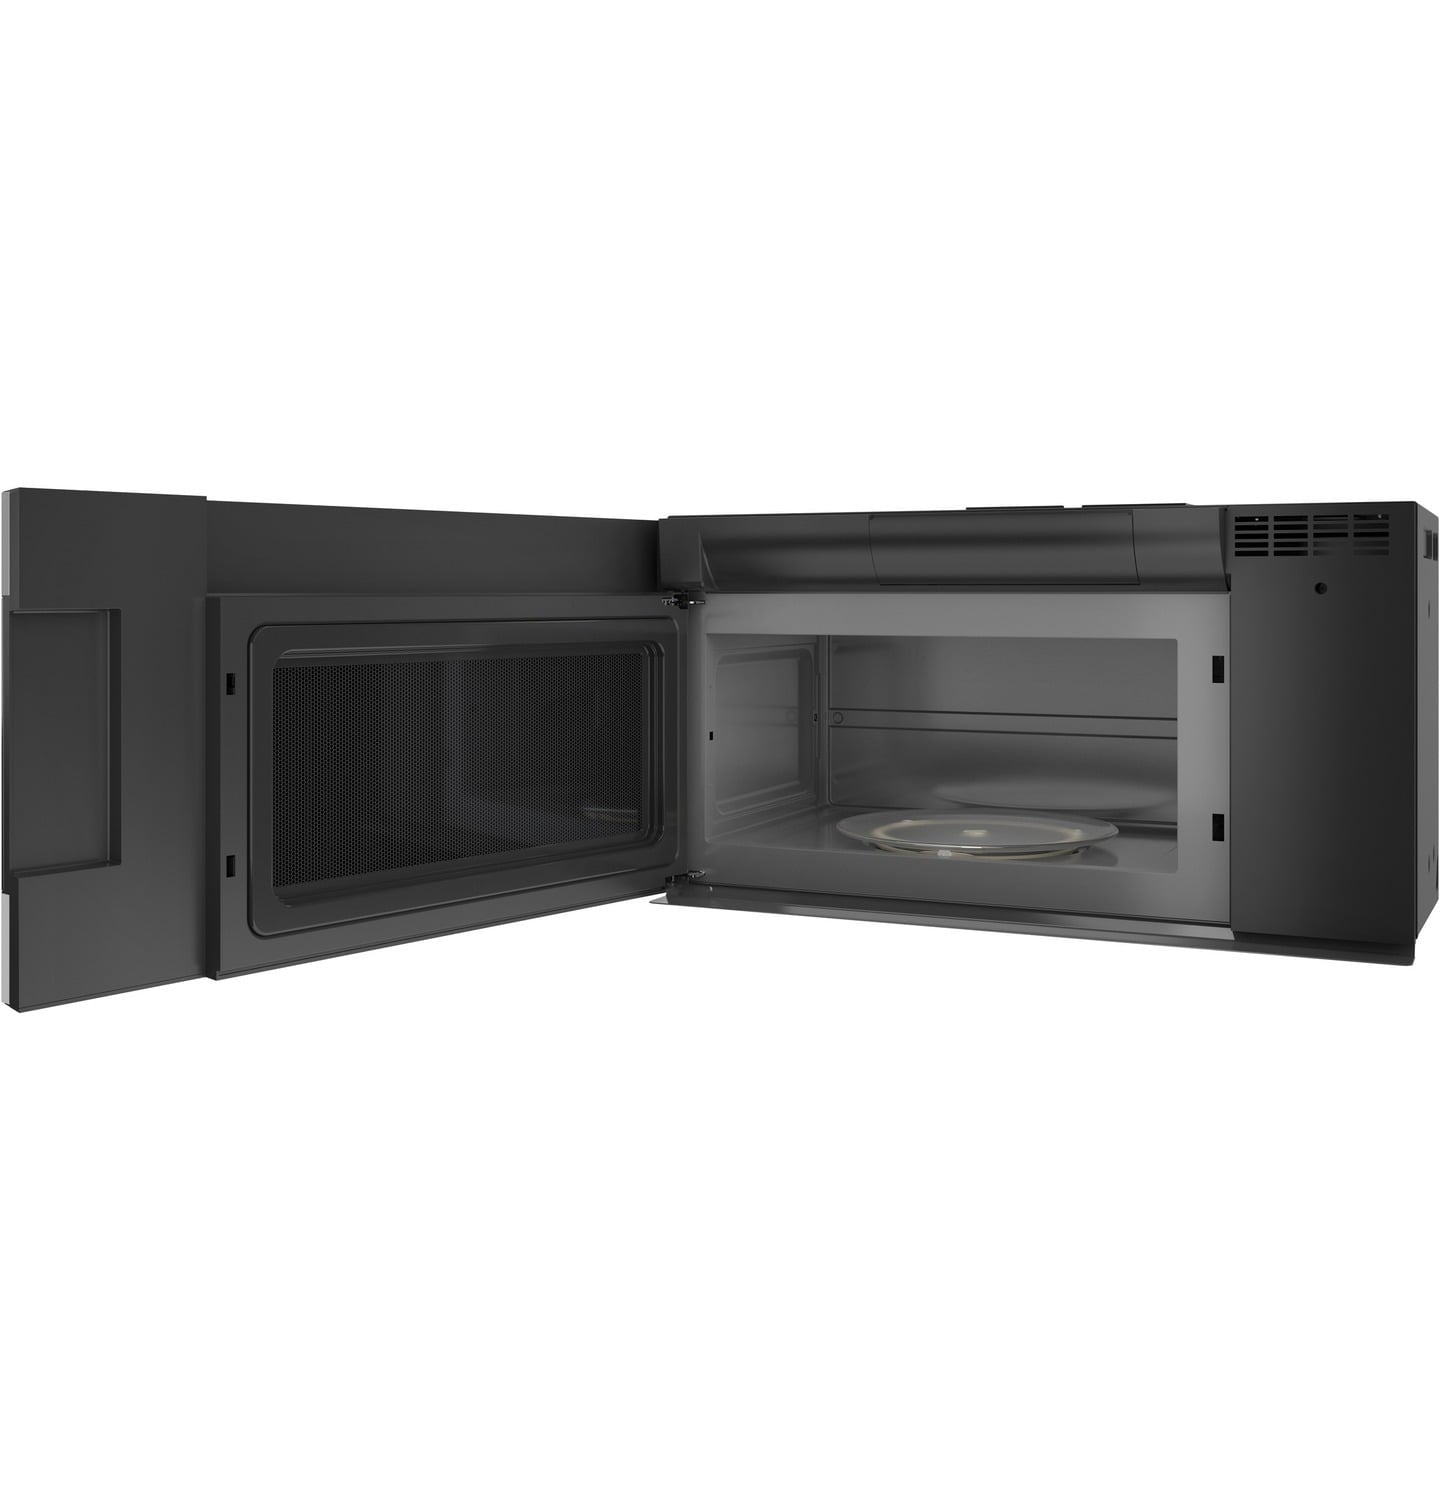 Haier QVM7167RNSS 30" 1.6 Cu. Ft. Smart Over-The-Range Microwave Oven